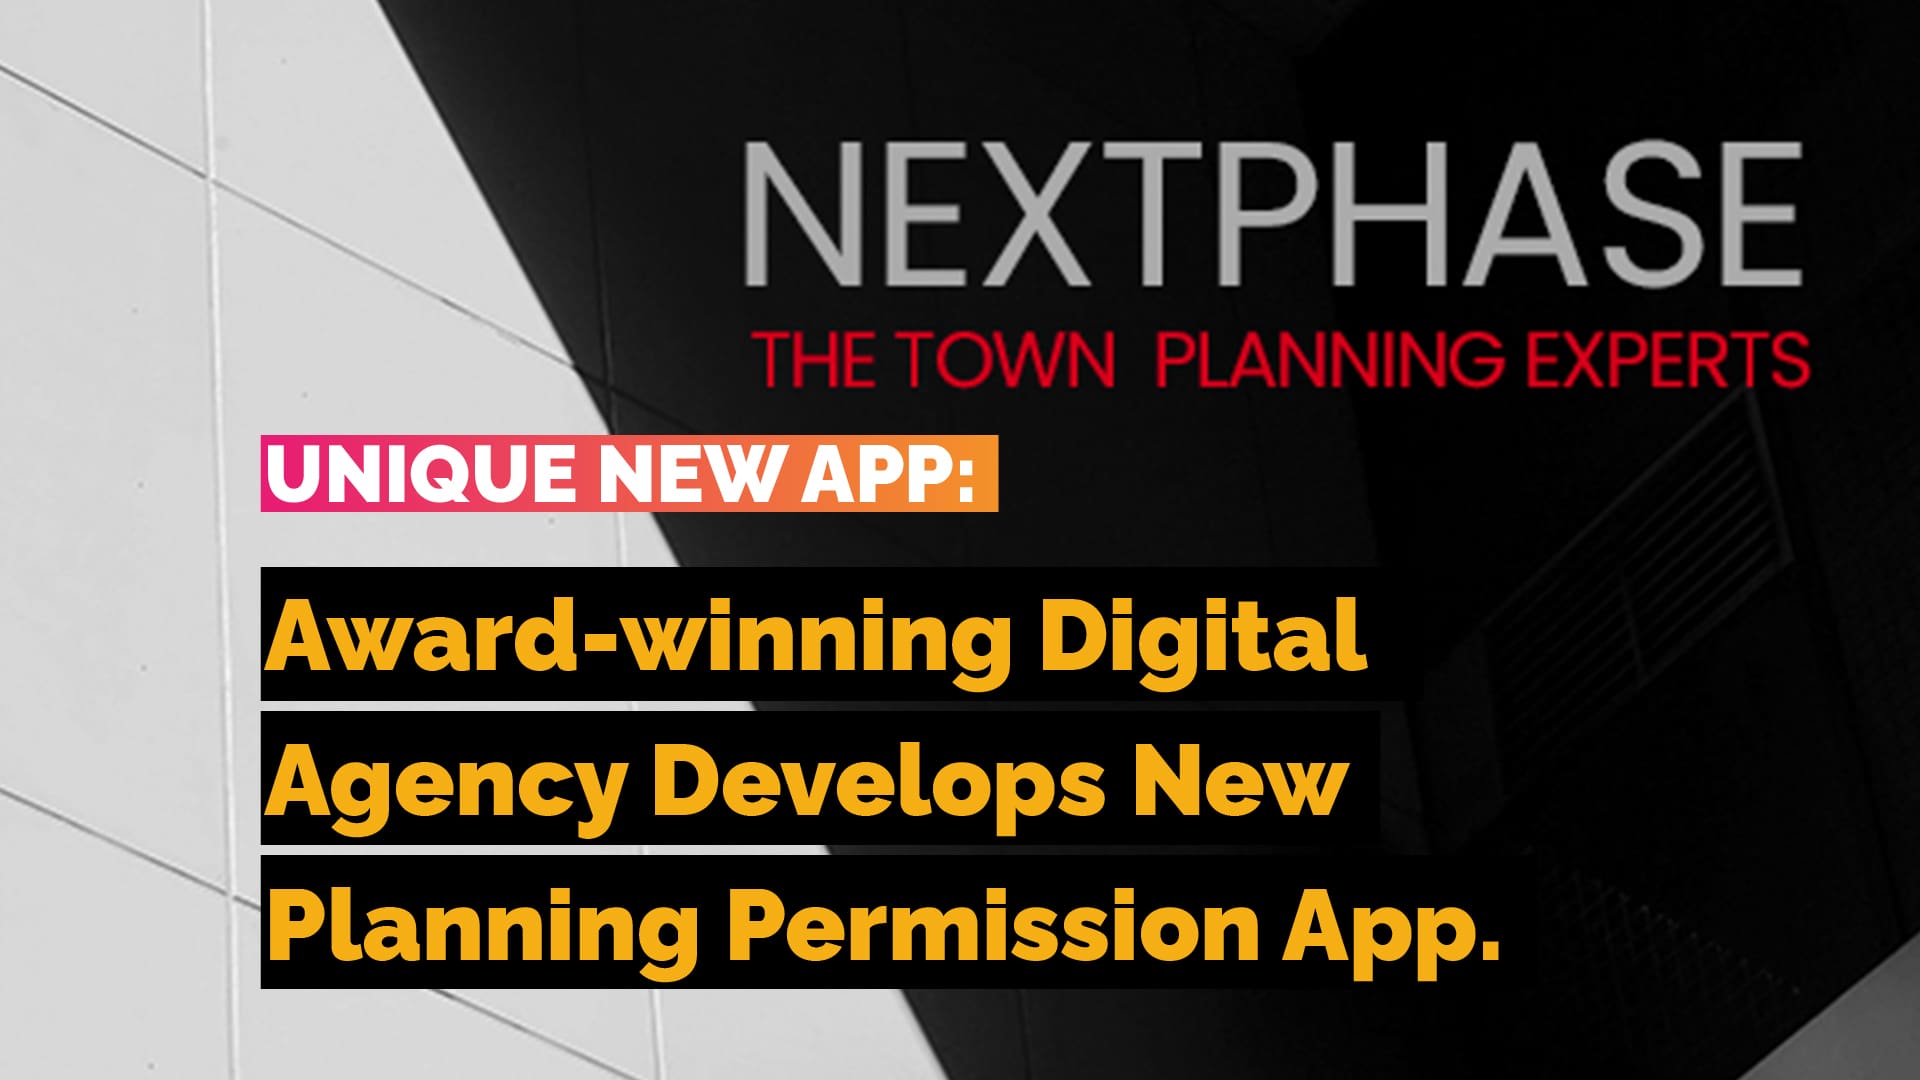 Award-Winning Digital Agency Develops New Planning Permission App - VOiD Applications Partners with NextPhase